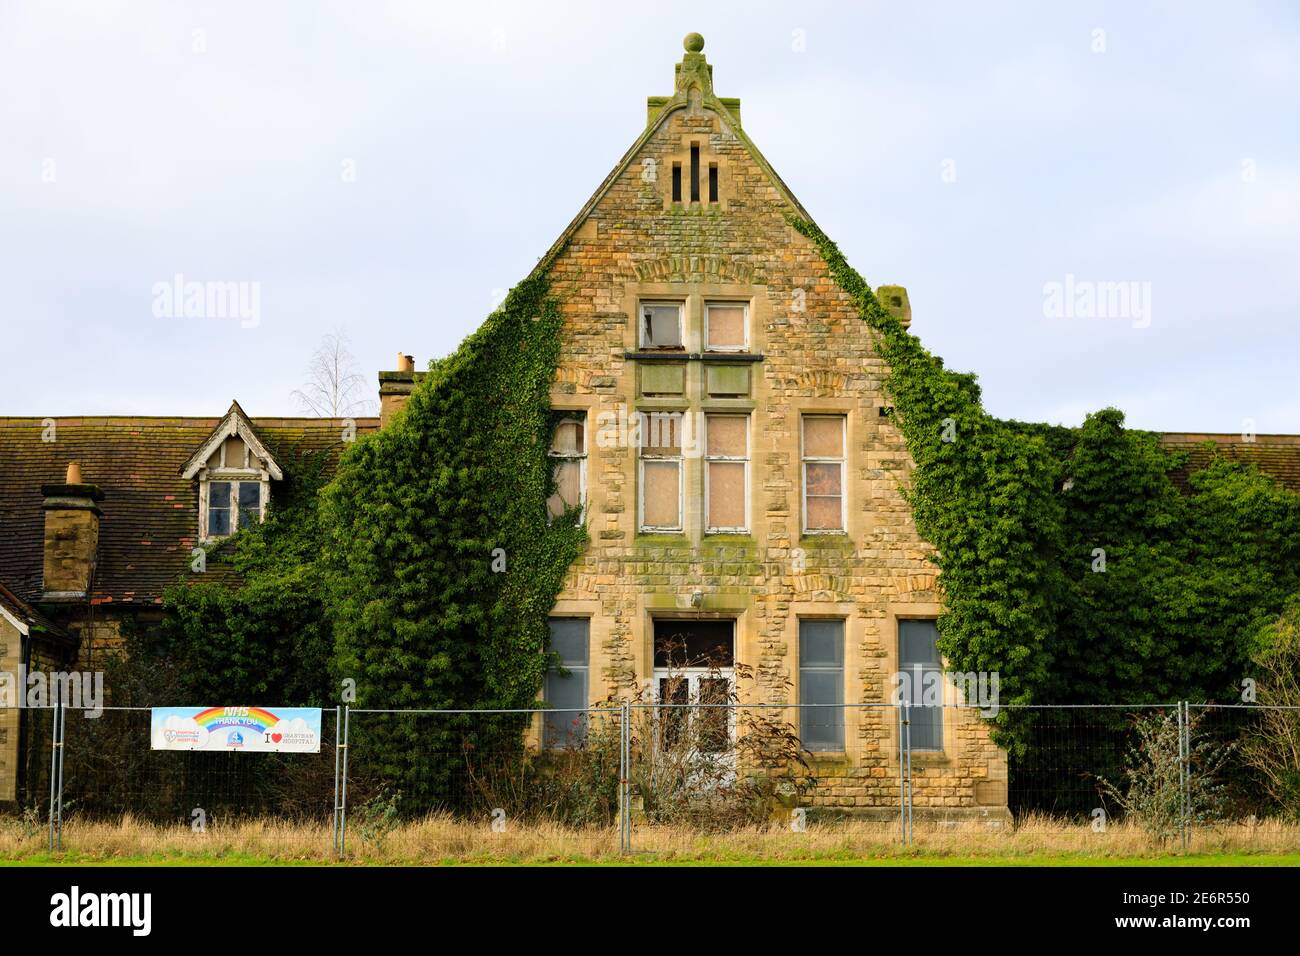 The old, derelict Hospital, Grantham Lincolnshire, England. with 'thank you NHS' banner Stock Photo